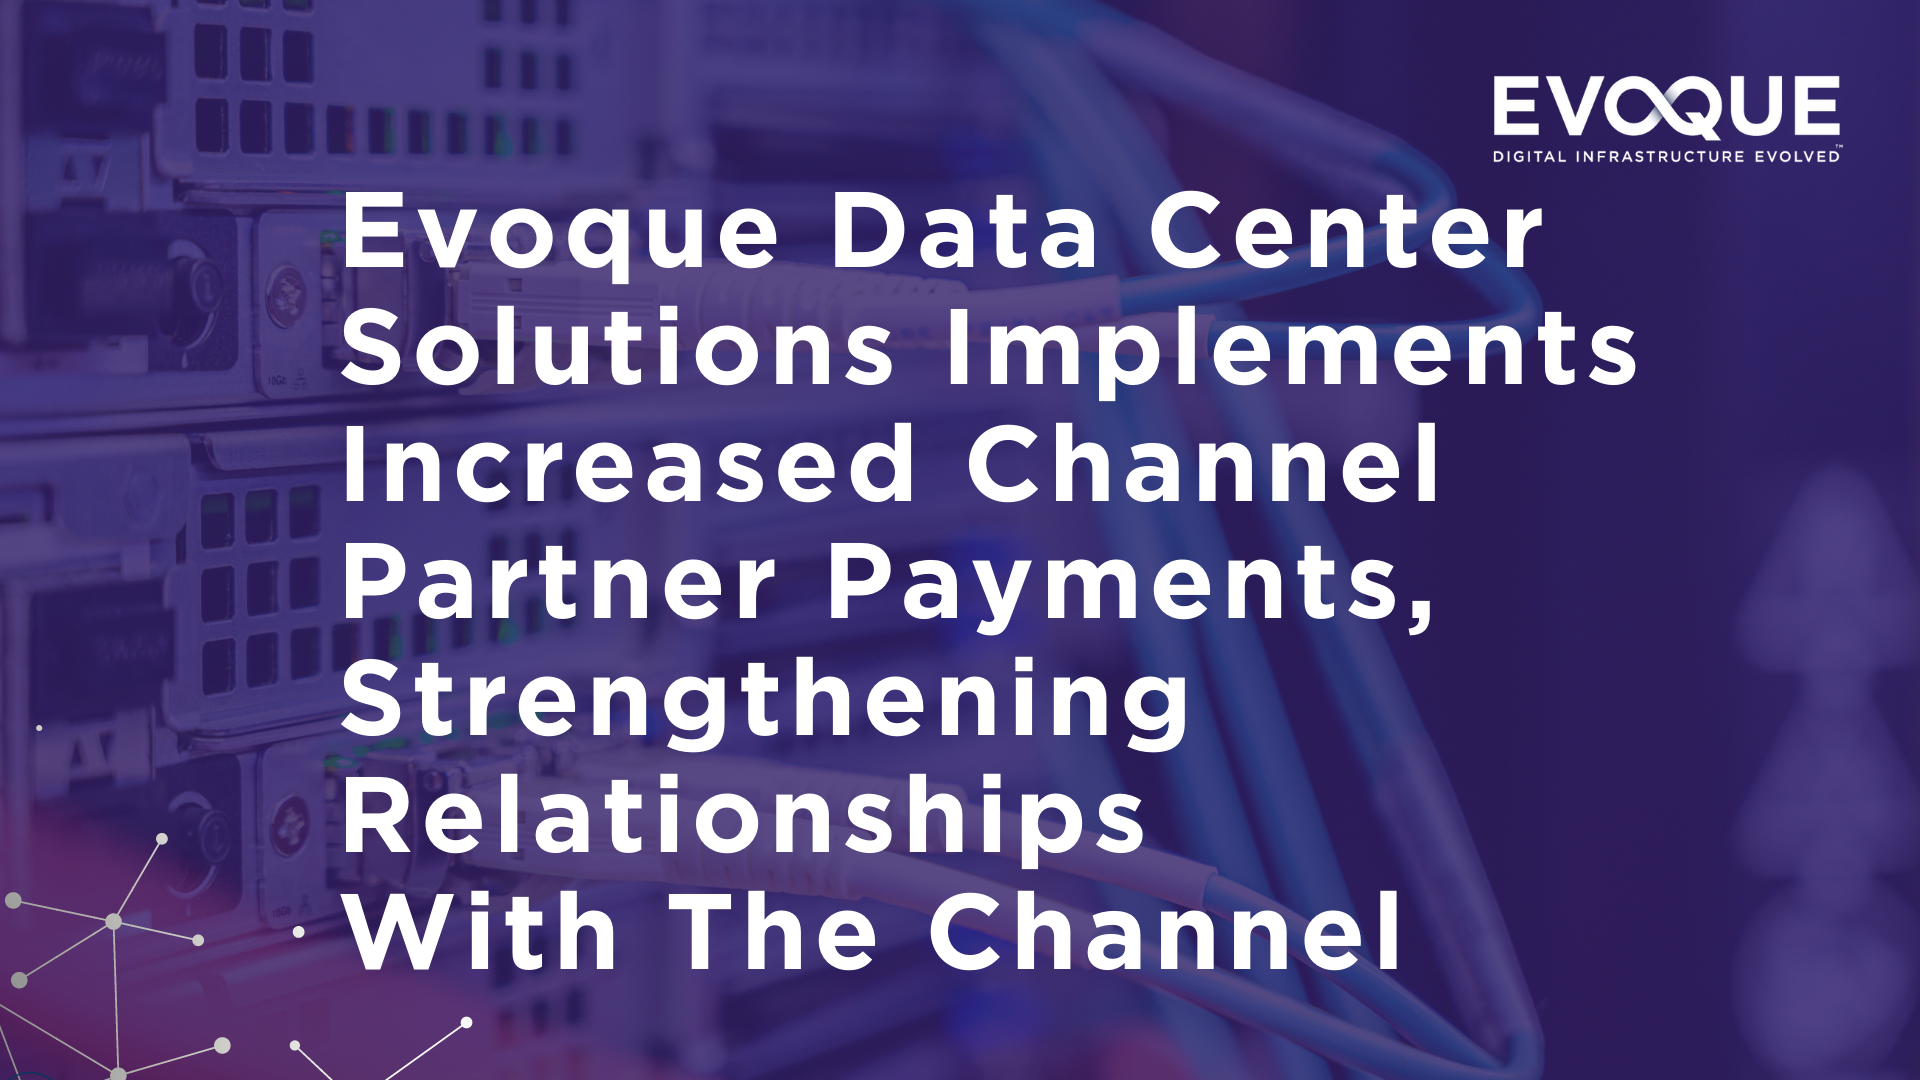 Evoque Data Center Solutions Implements Increased Channel Partner Payments, Strengthening Relationships With The Channel